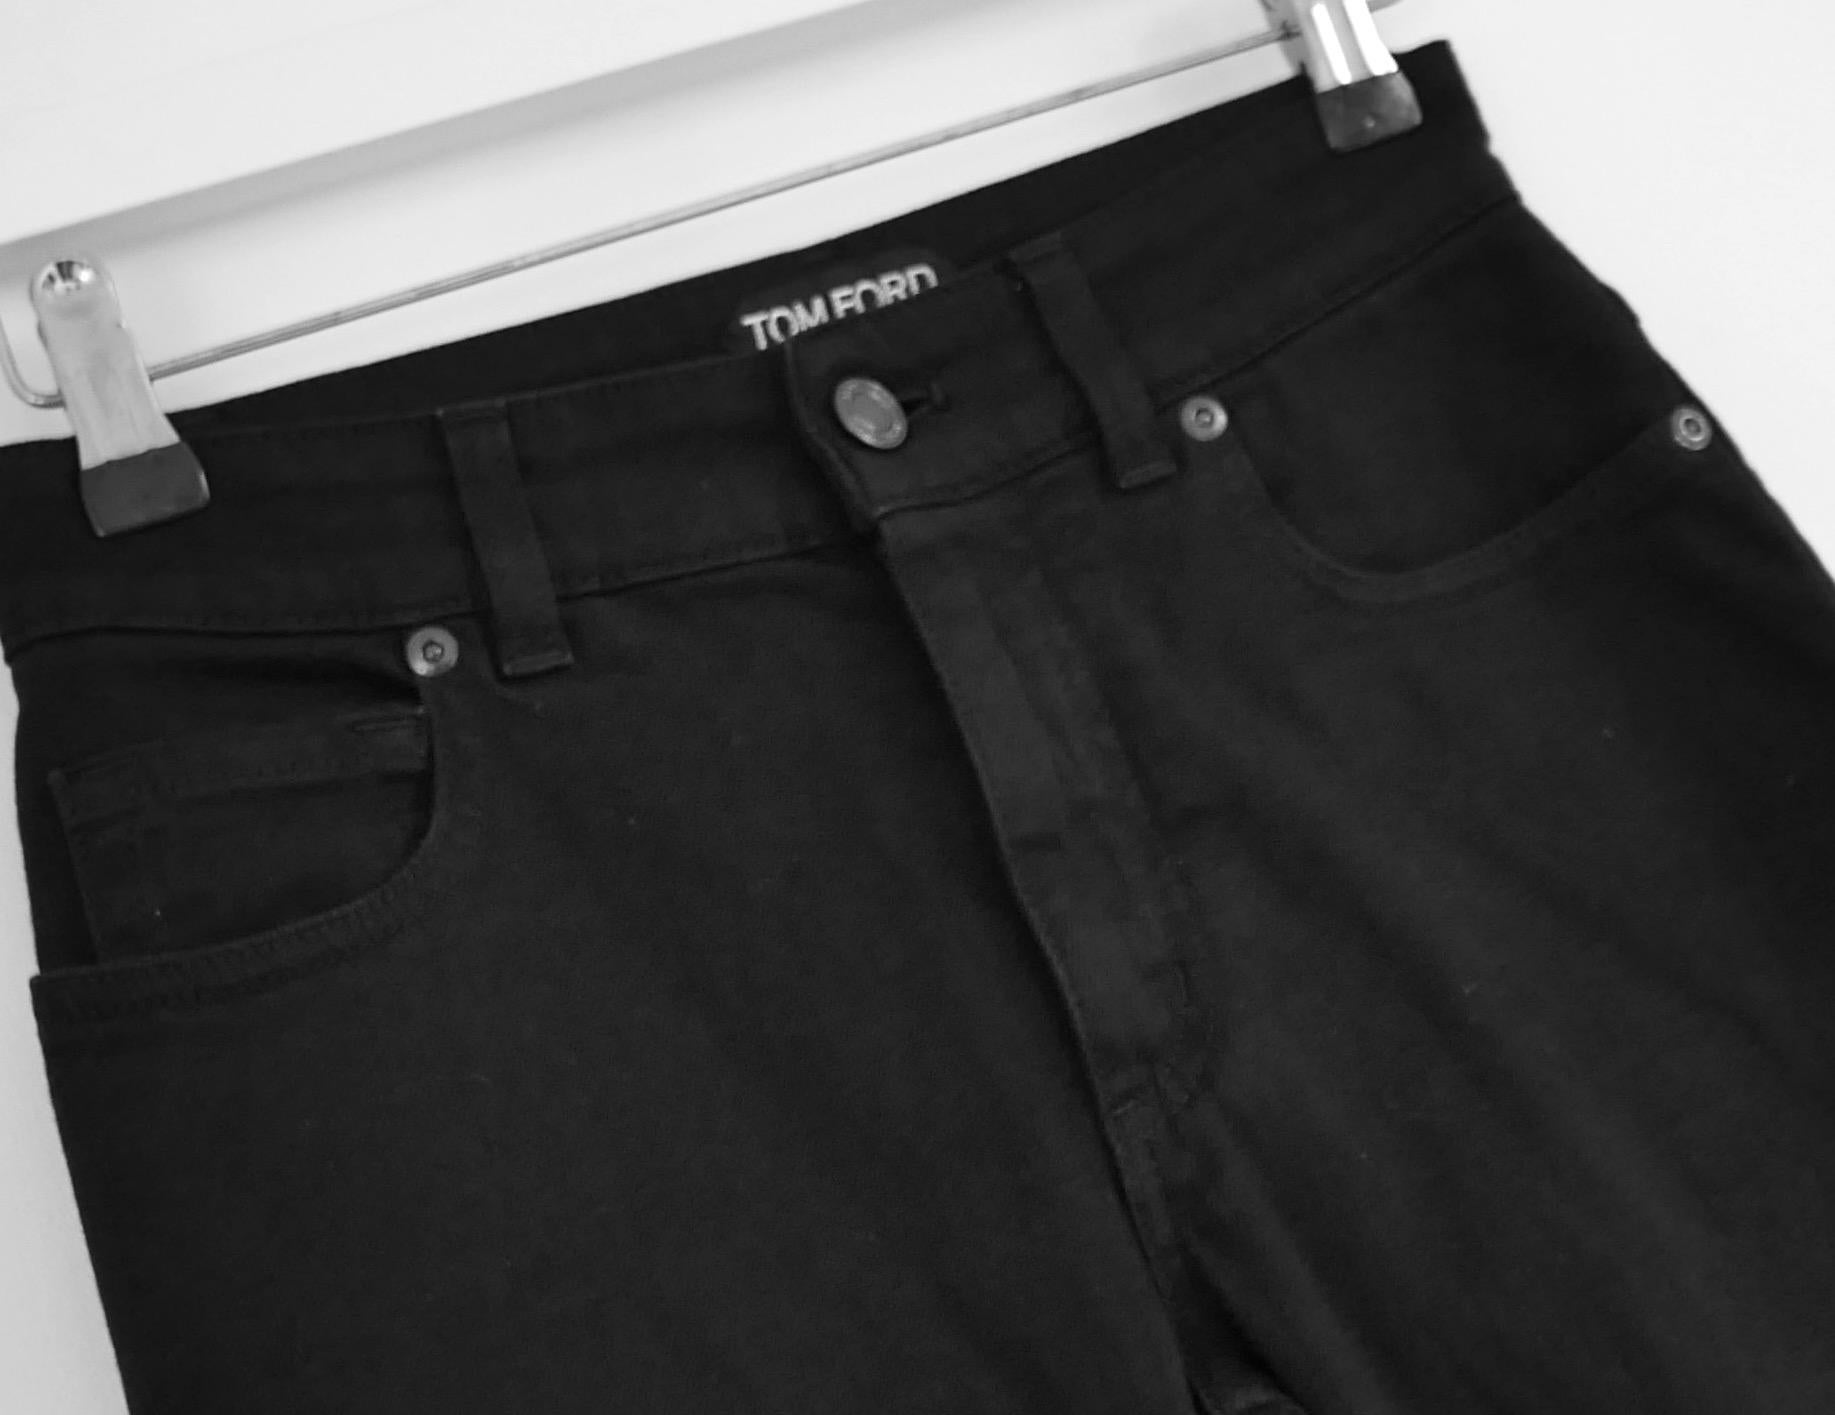 Super sexy, luxe Tom Ford flared jeans. bought for £800 and worn once. Made from super high quality, black stretch denim with gunmetal Tom Ford embossed hardware and little Tom Ford label to hip. They have a skinny fit through the hips and thighs